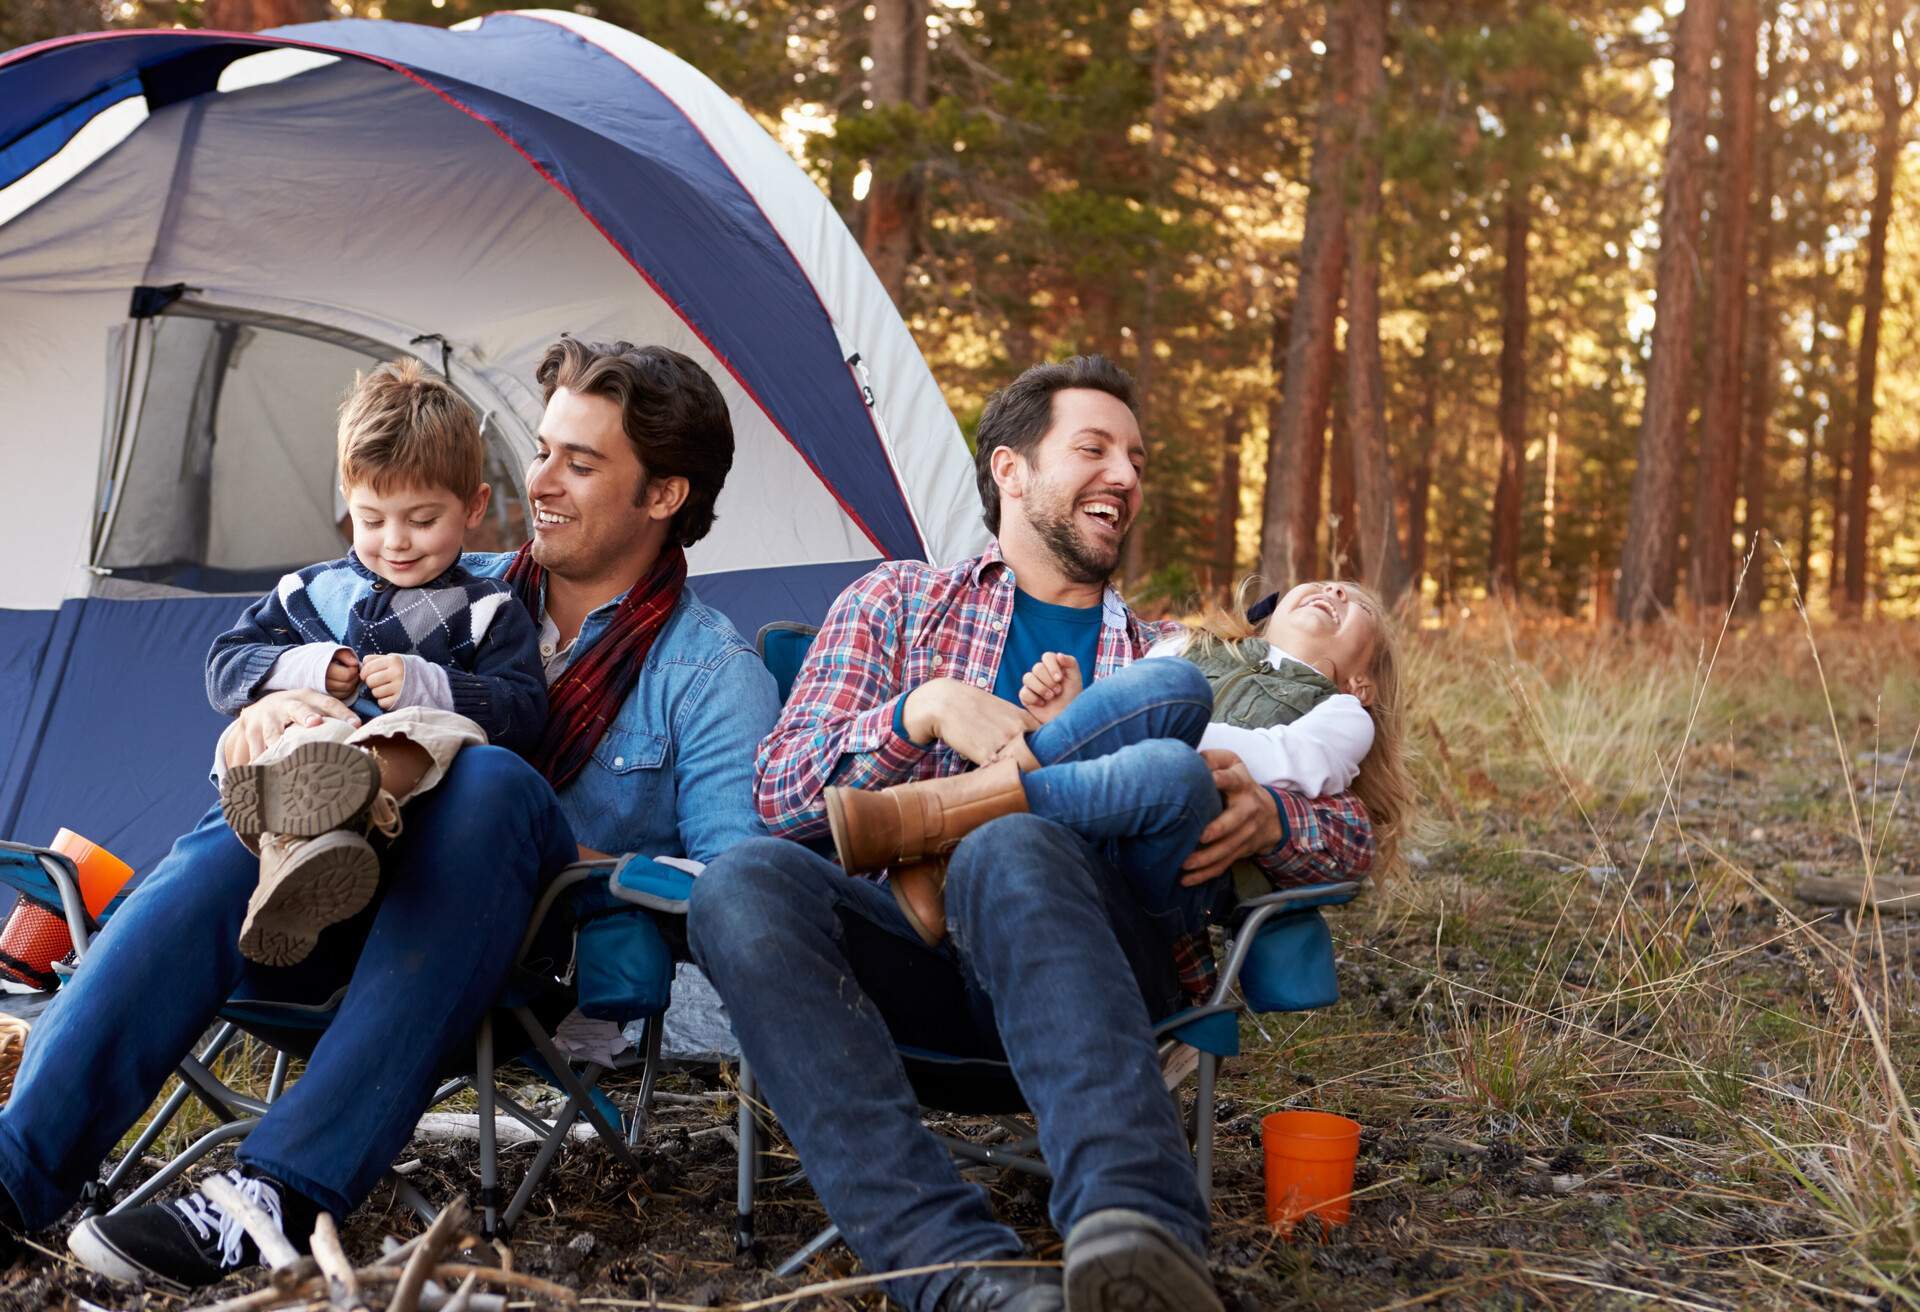 CAMPING_FAMILY_DADS_FATHERS_KIDS_TRAVEL_OUTDOORS